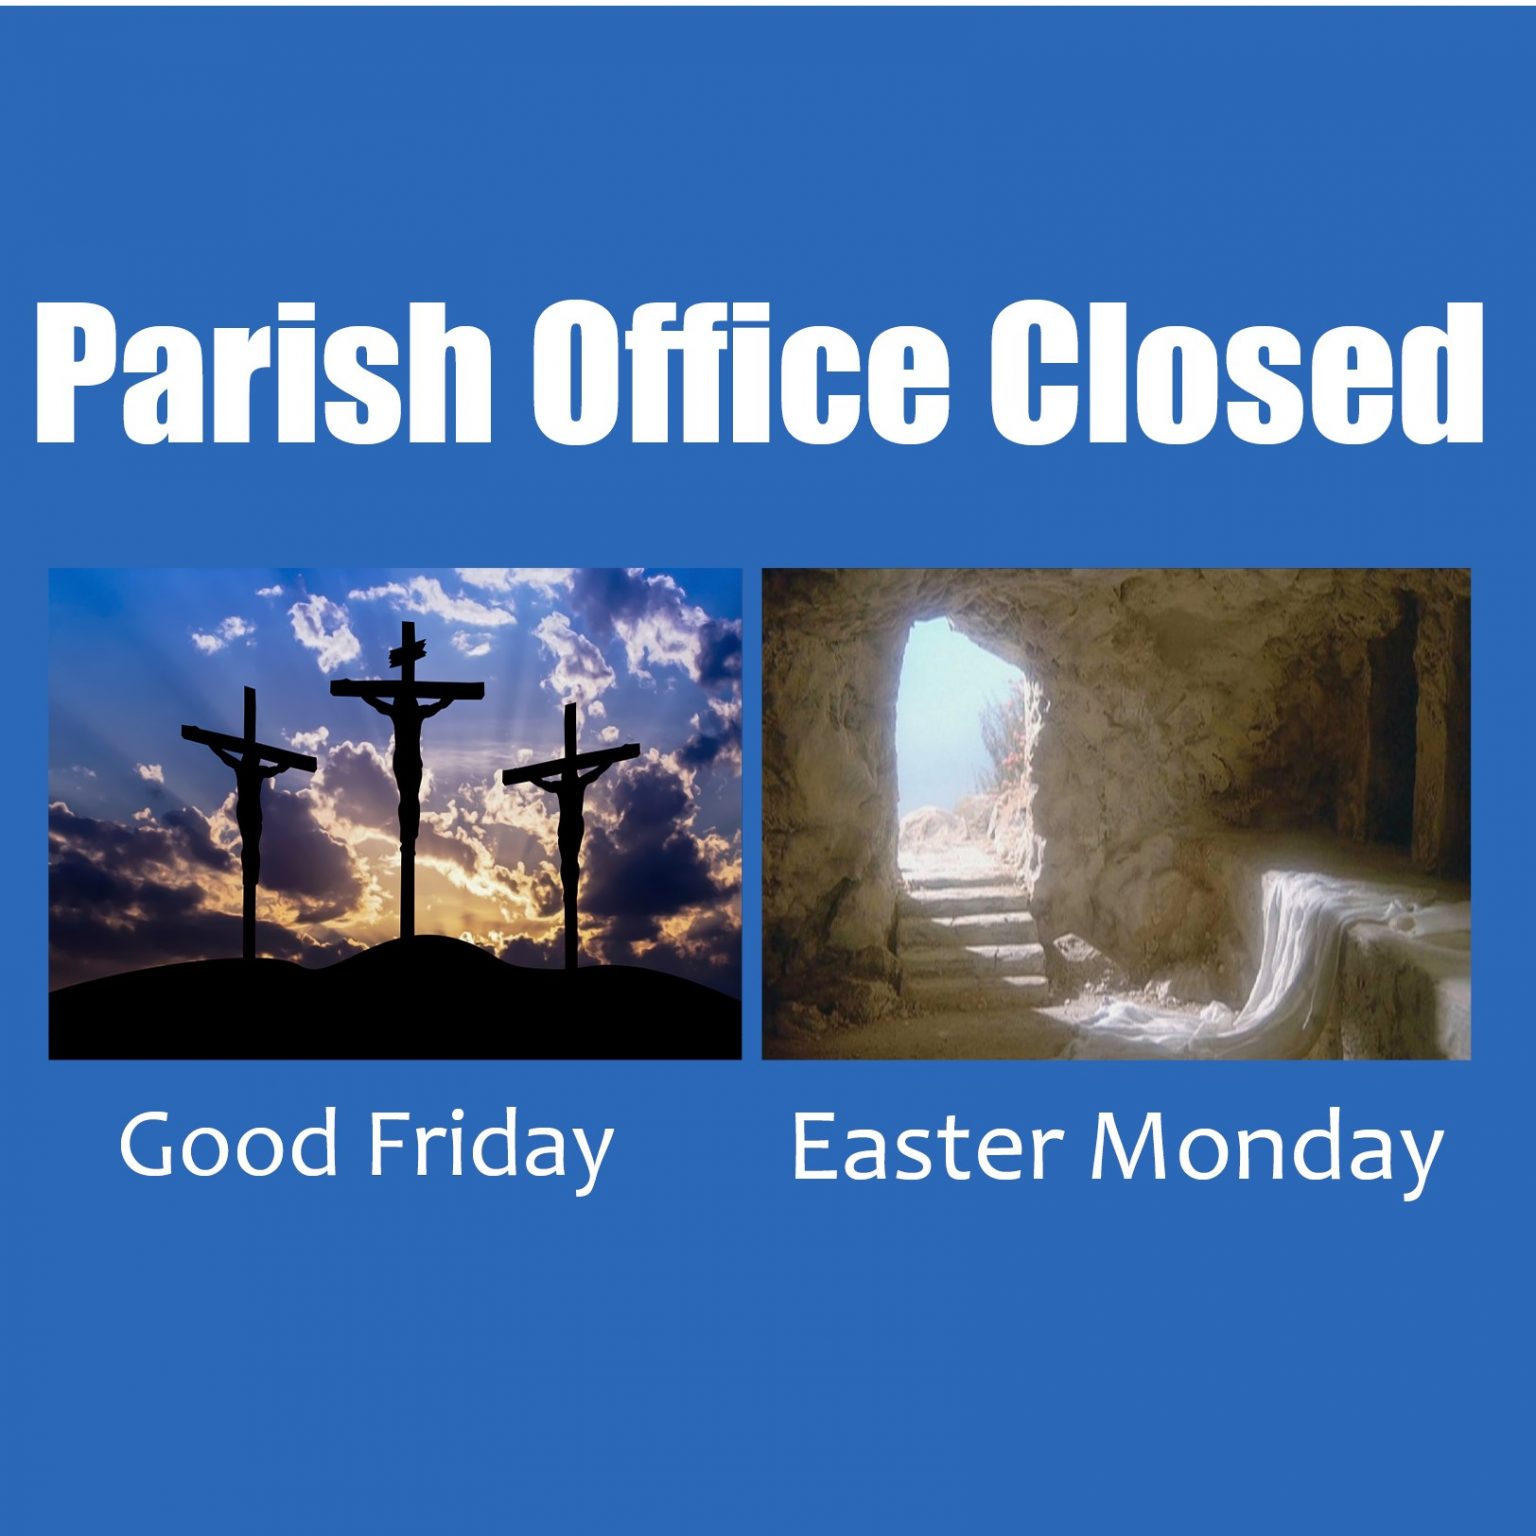 Our Lady of the Wayside Catholic Church Parish Office Closed Good